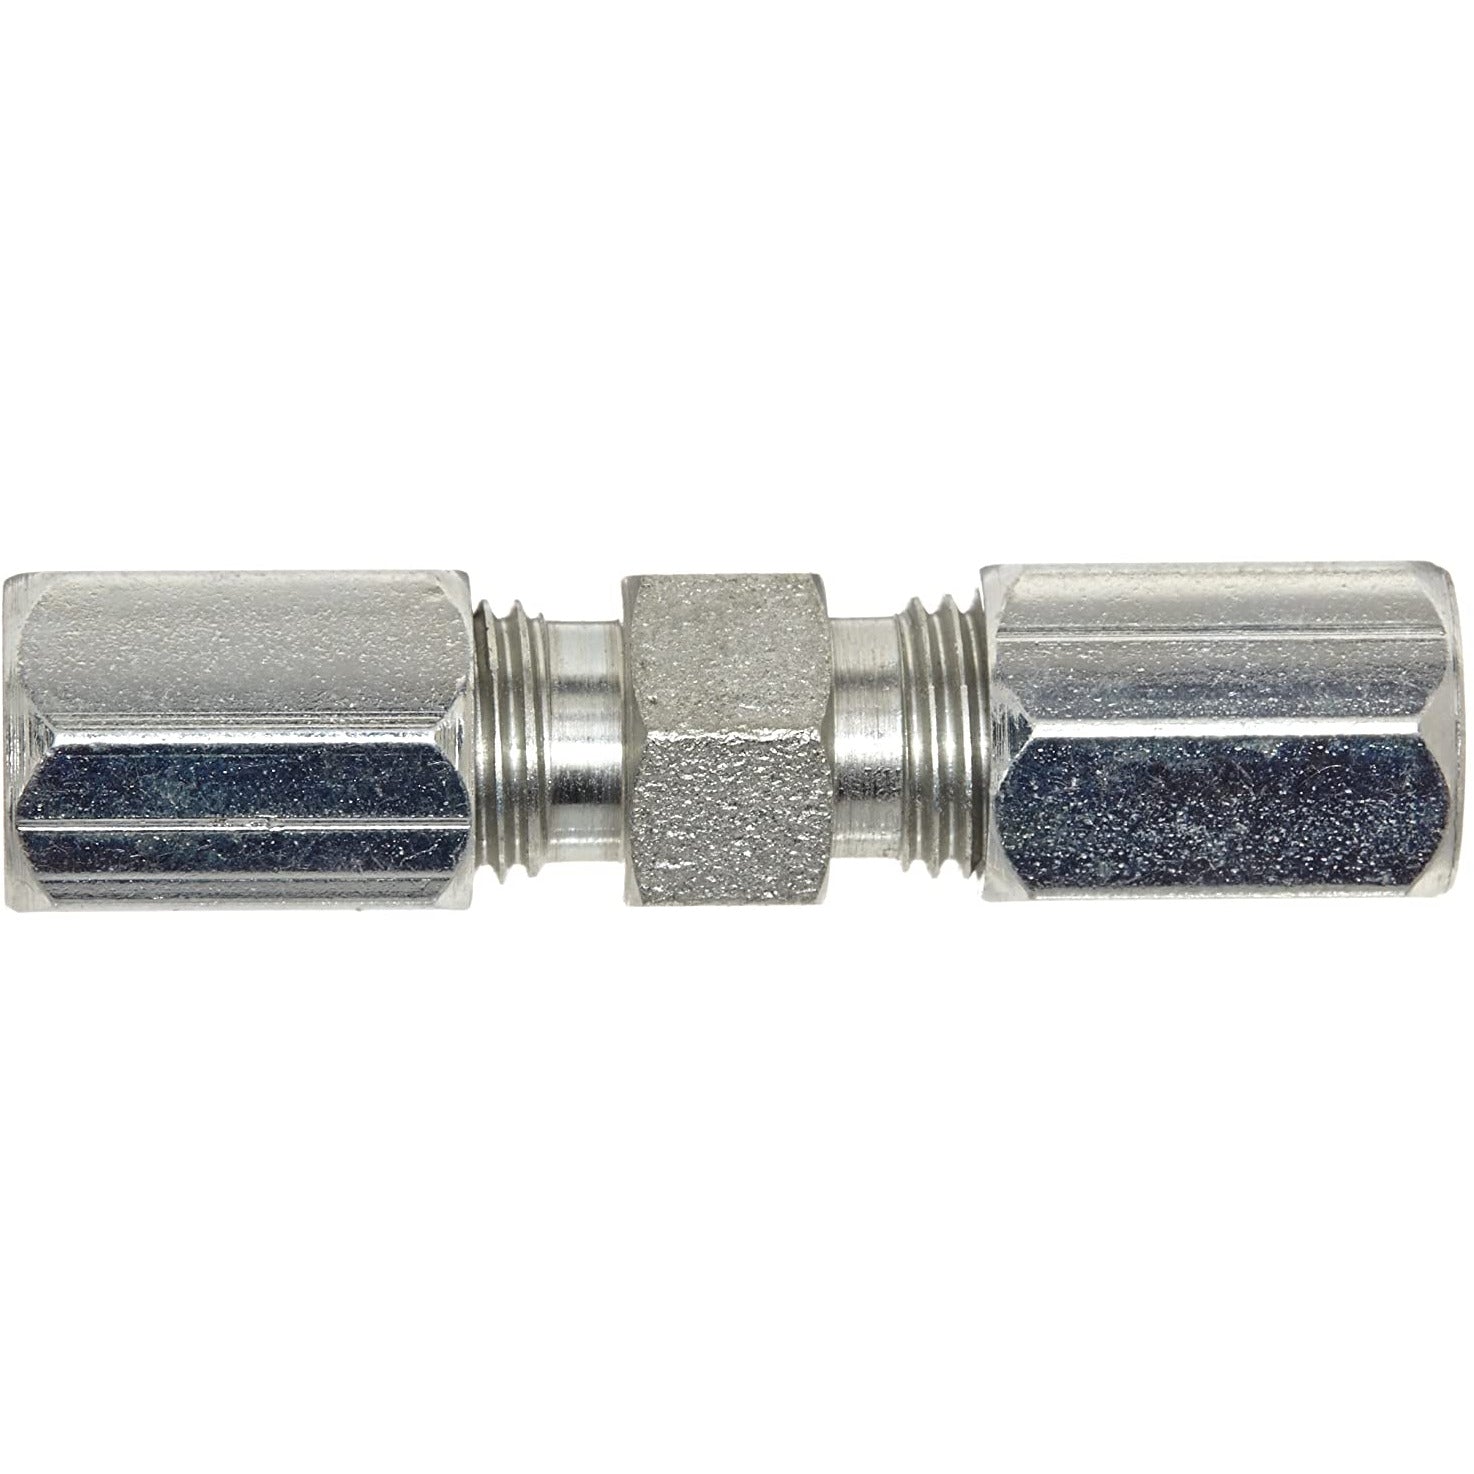 EDE 7305X3 Eaton High Pressure Steel DOT Compression Fitting (3/16")